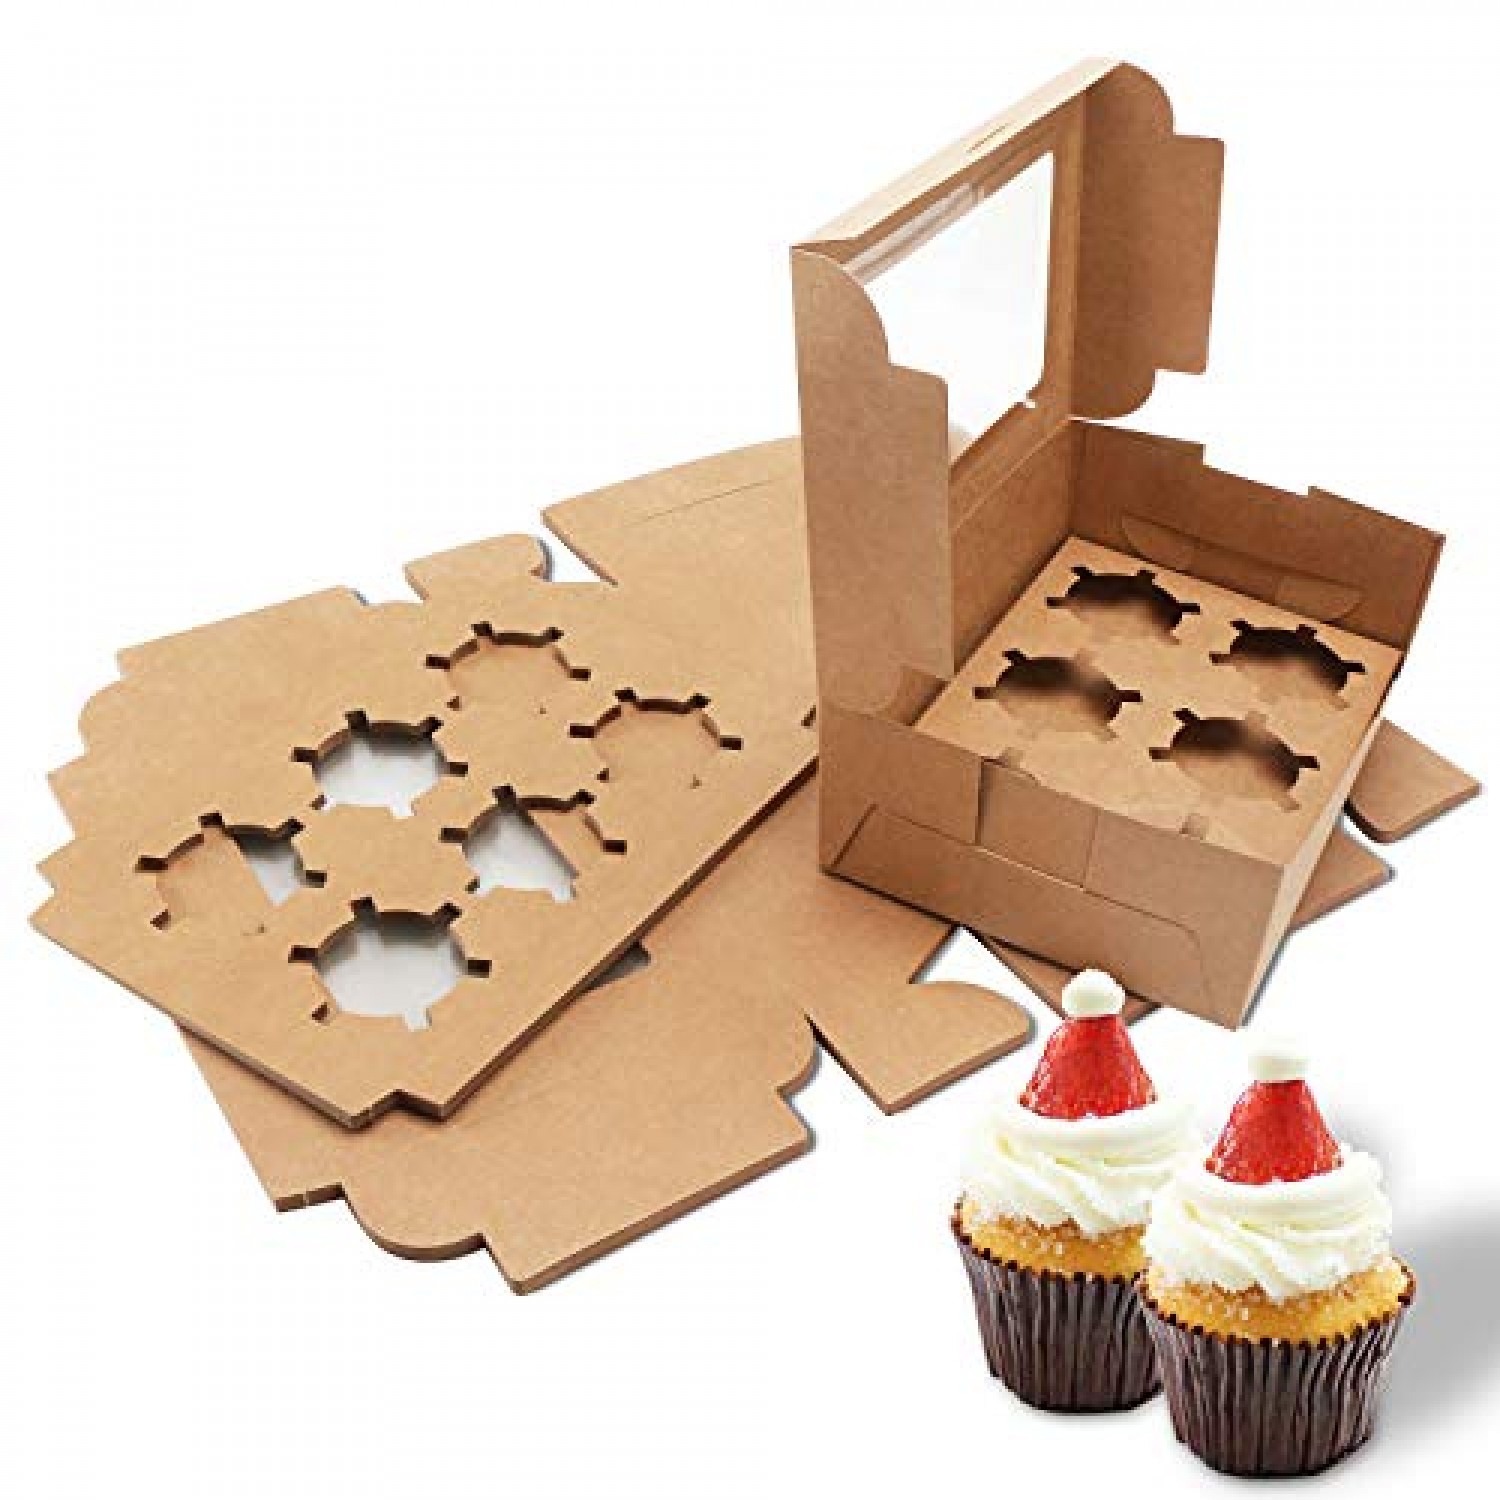 Some Important Features Of The Exclusive Cupcake Boxes